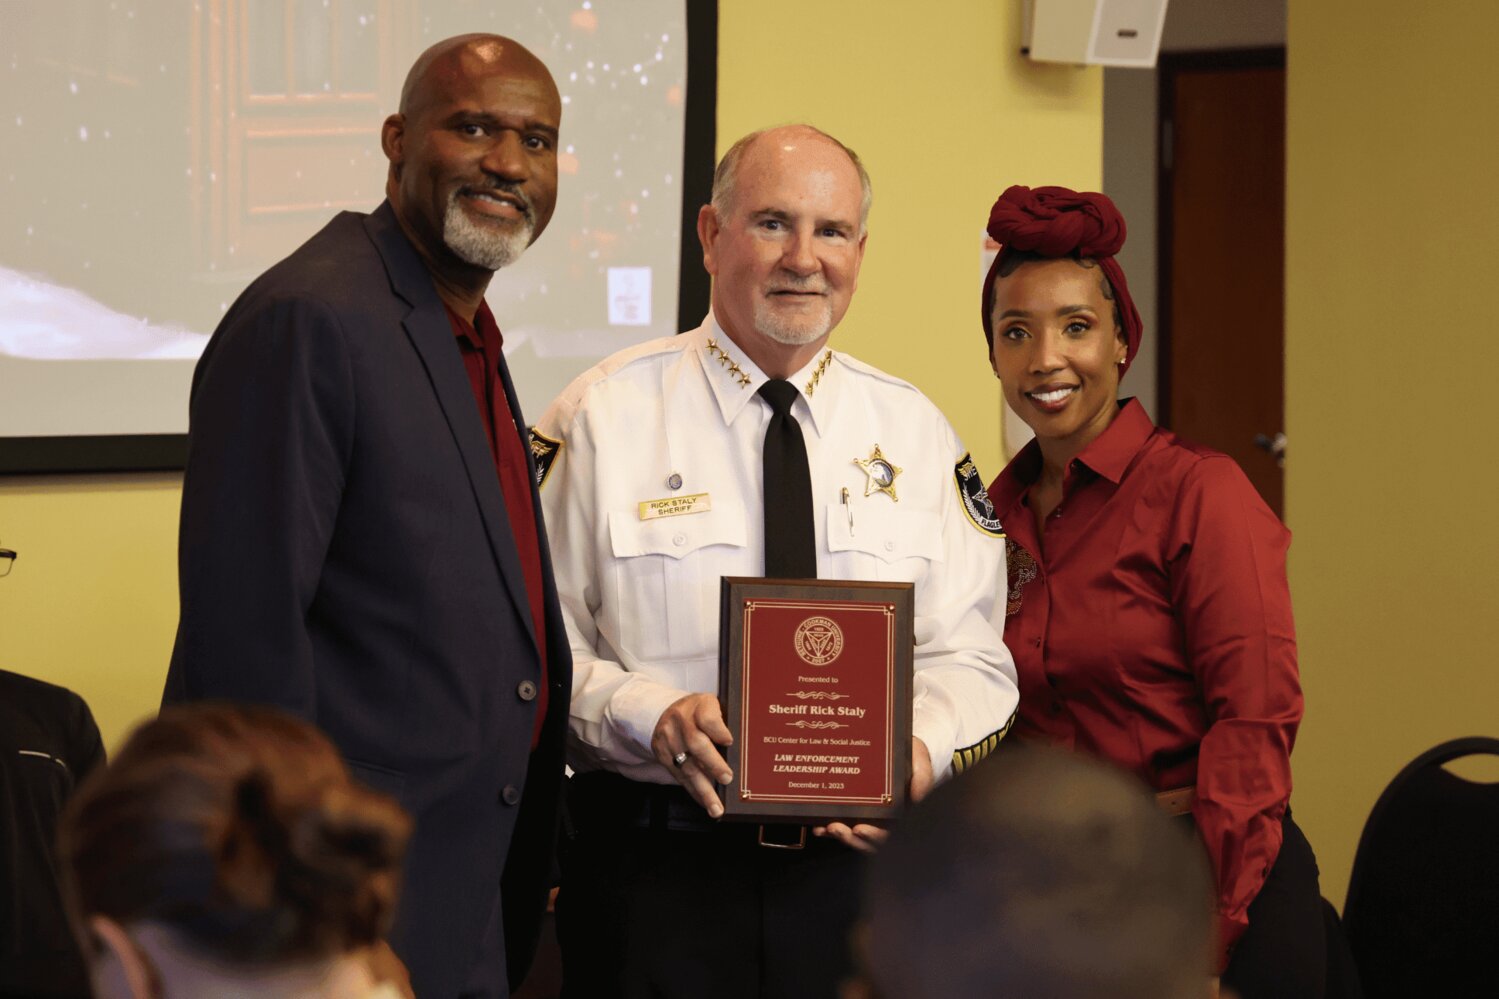 Rick Staly Recognized by Bethune-Cookman University